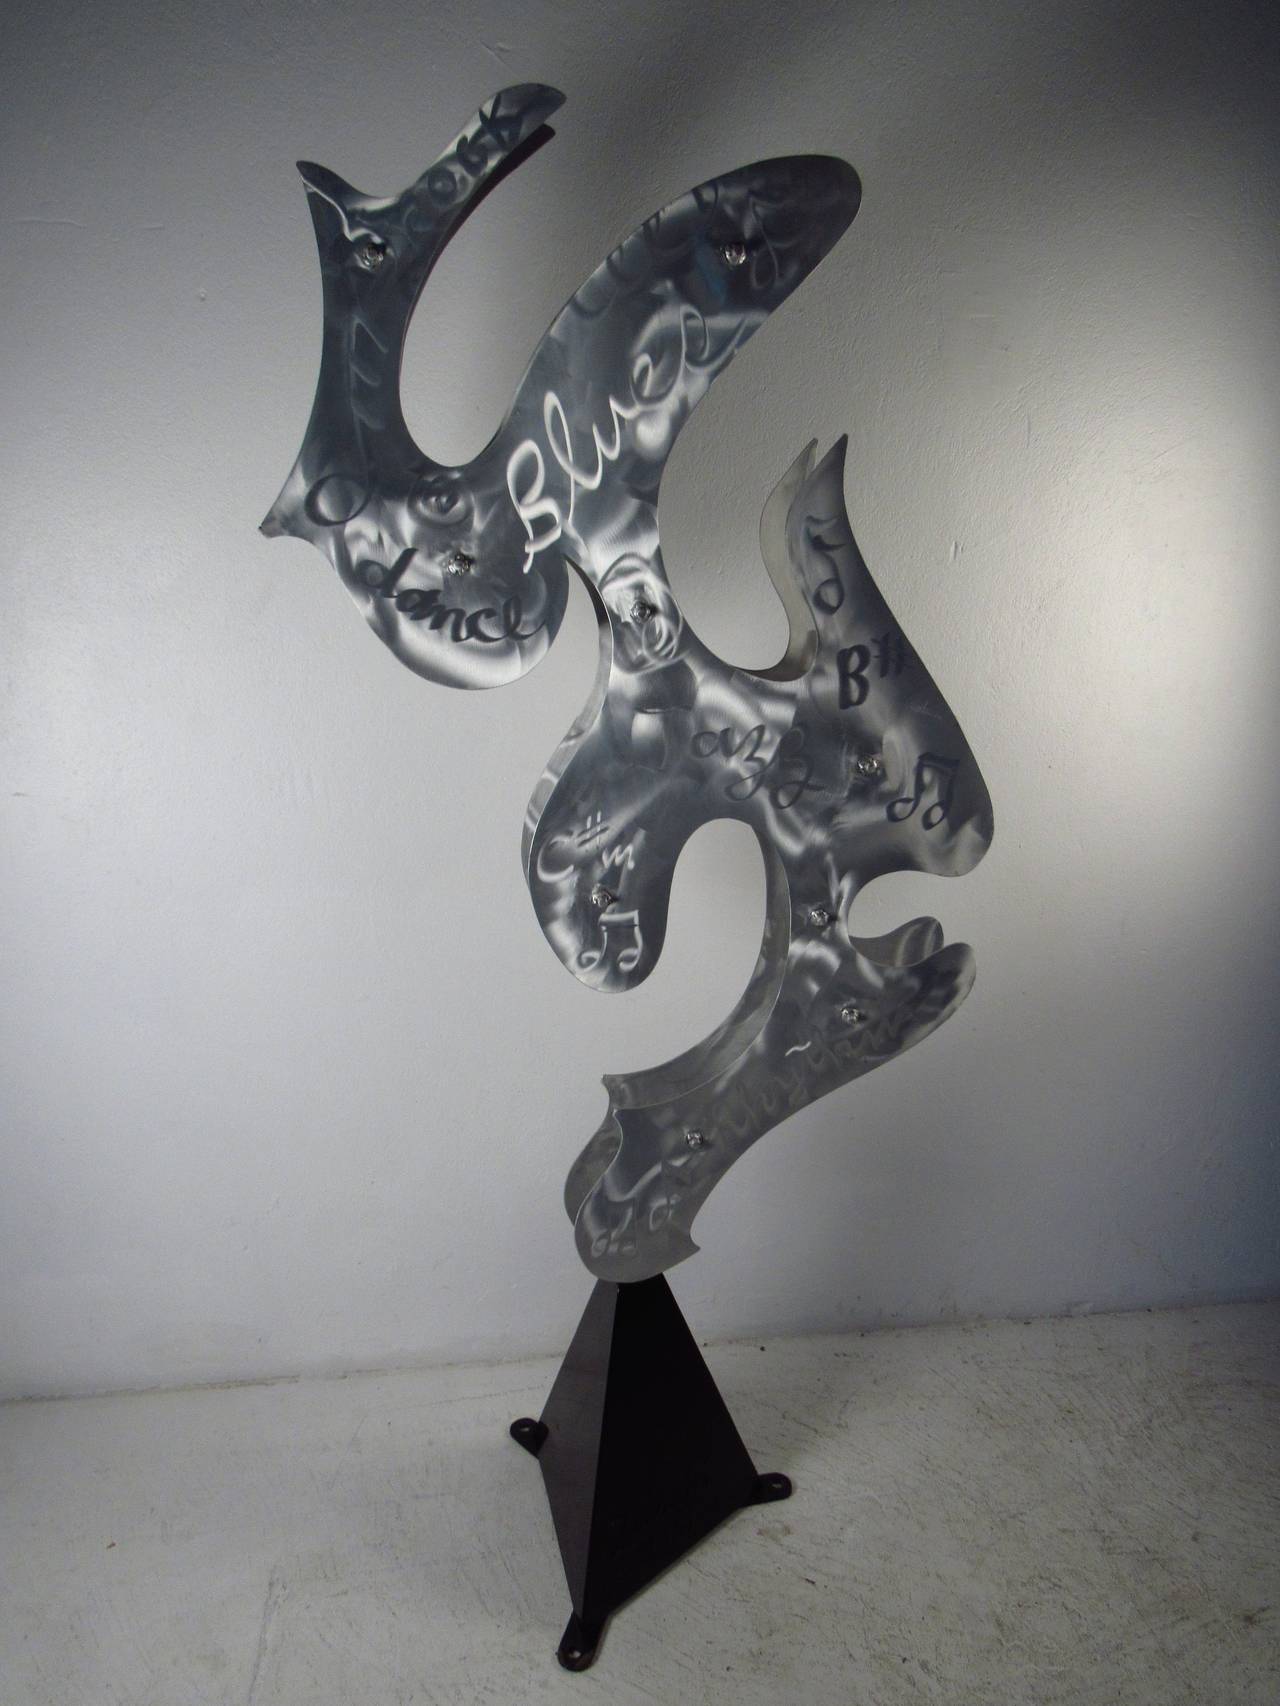 Enameled aluminum sculpture with a music theme by international artist and sculptor, Steve Zaluski. Impressive artwork for home or business. Please confirm item location (NY or NJ) with dealer.